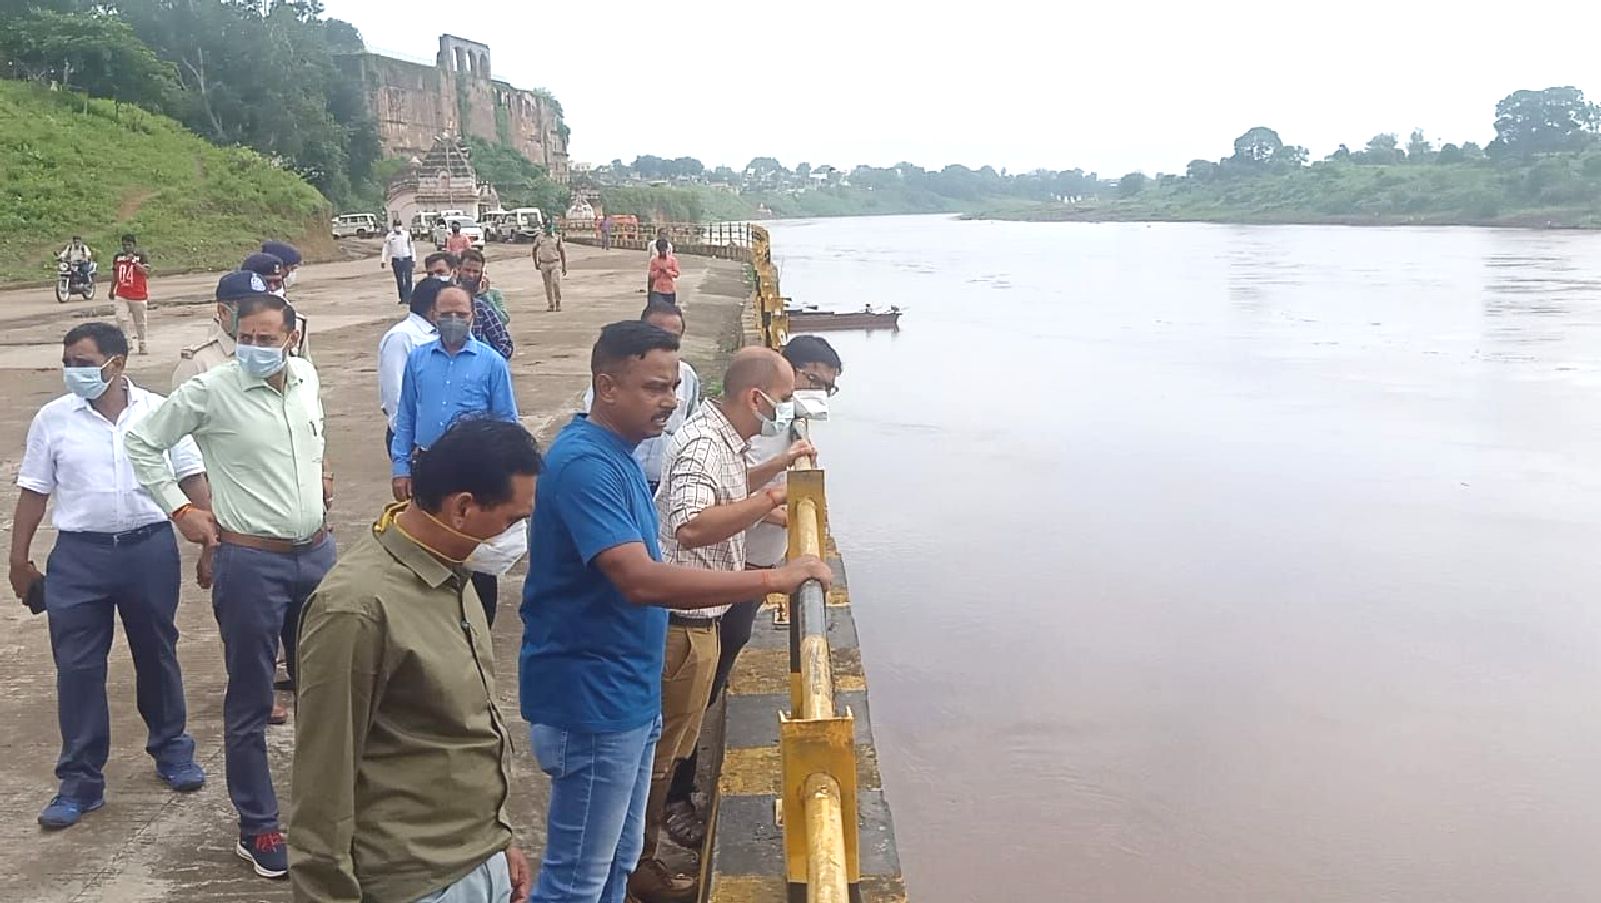 Officers reached the Ghat of Tapti, complete preparations for Ganesha immersion